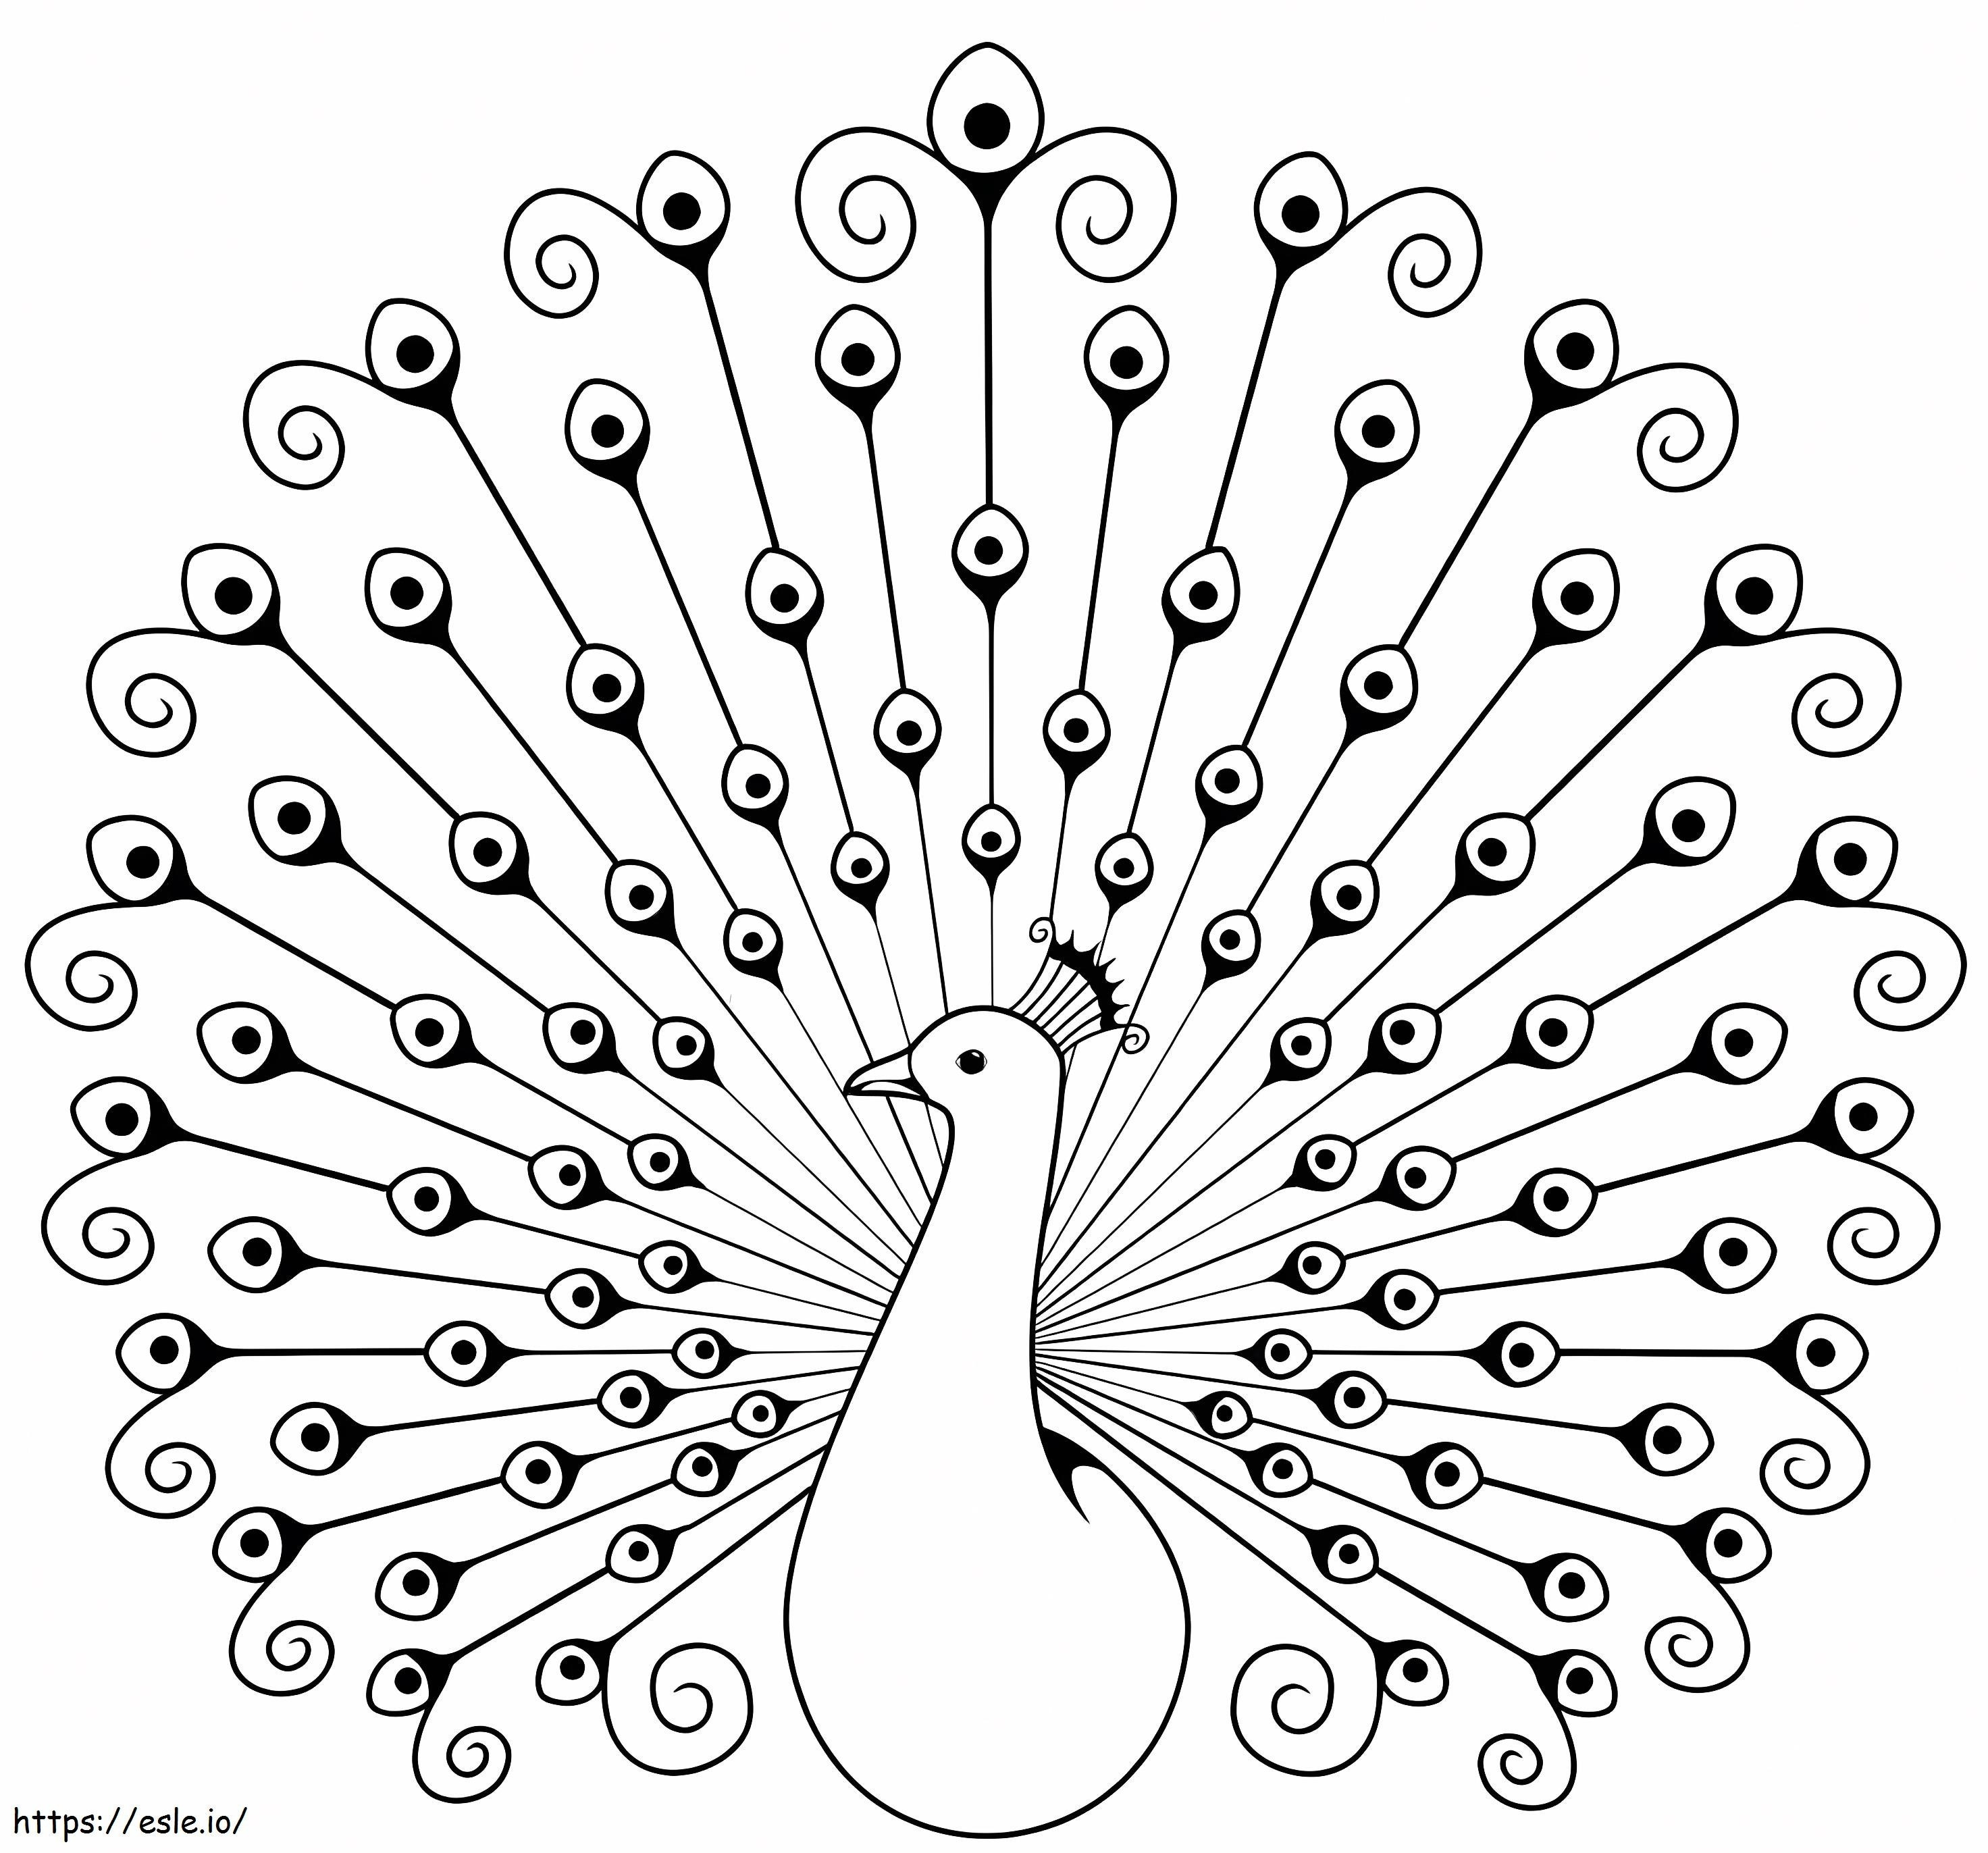 Symmetrical Peacock coloring page